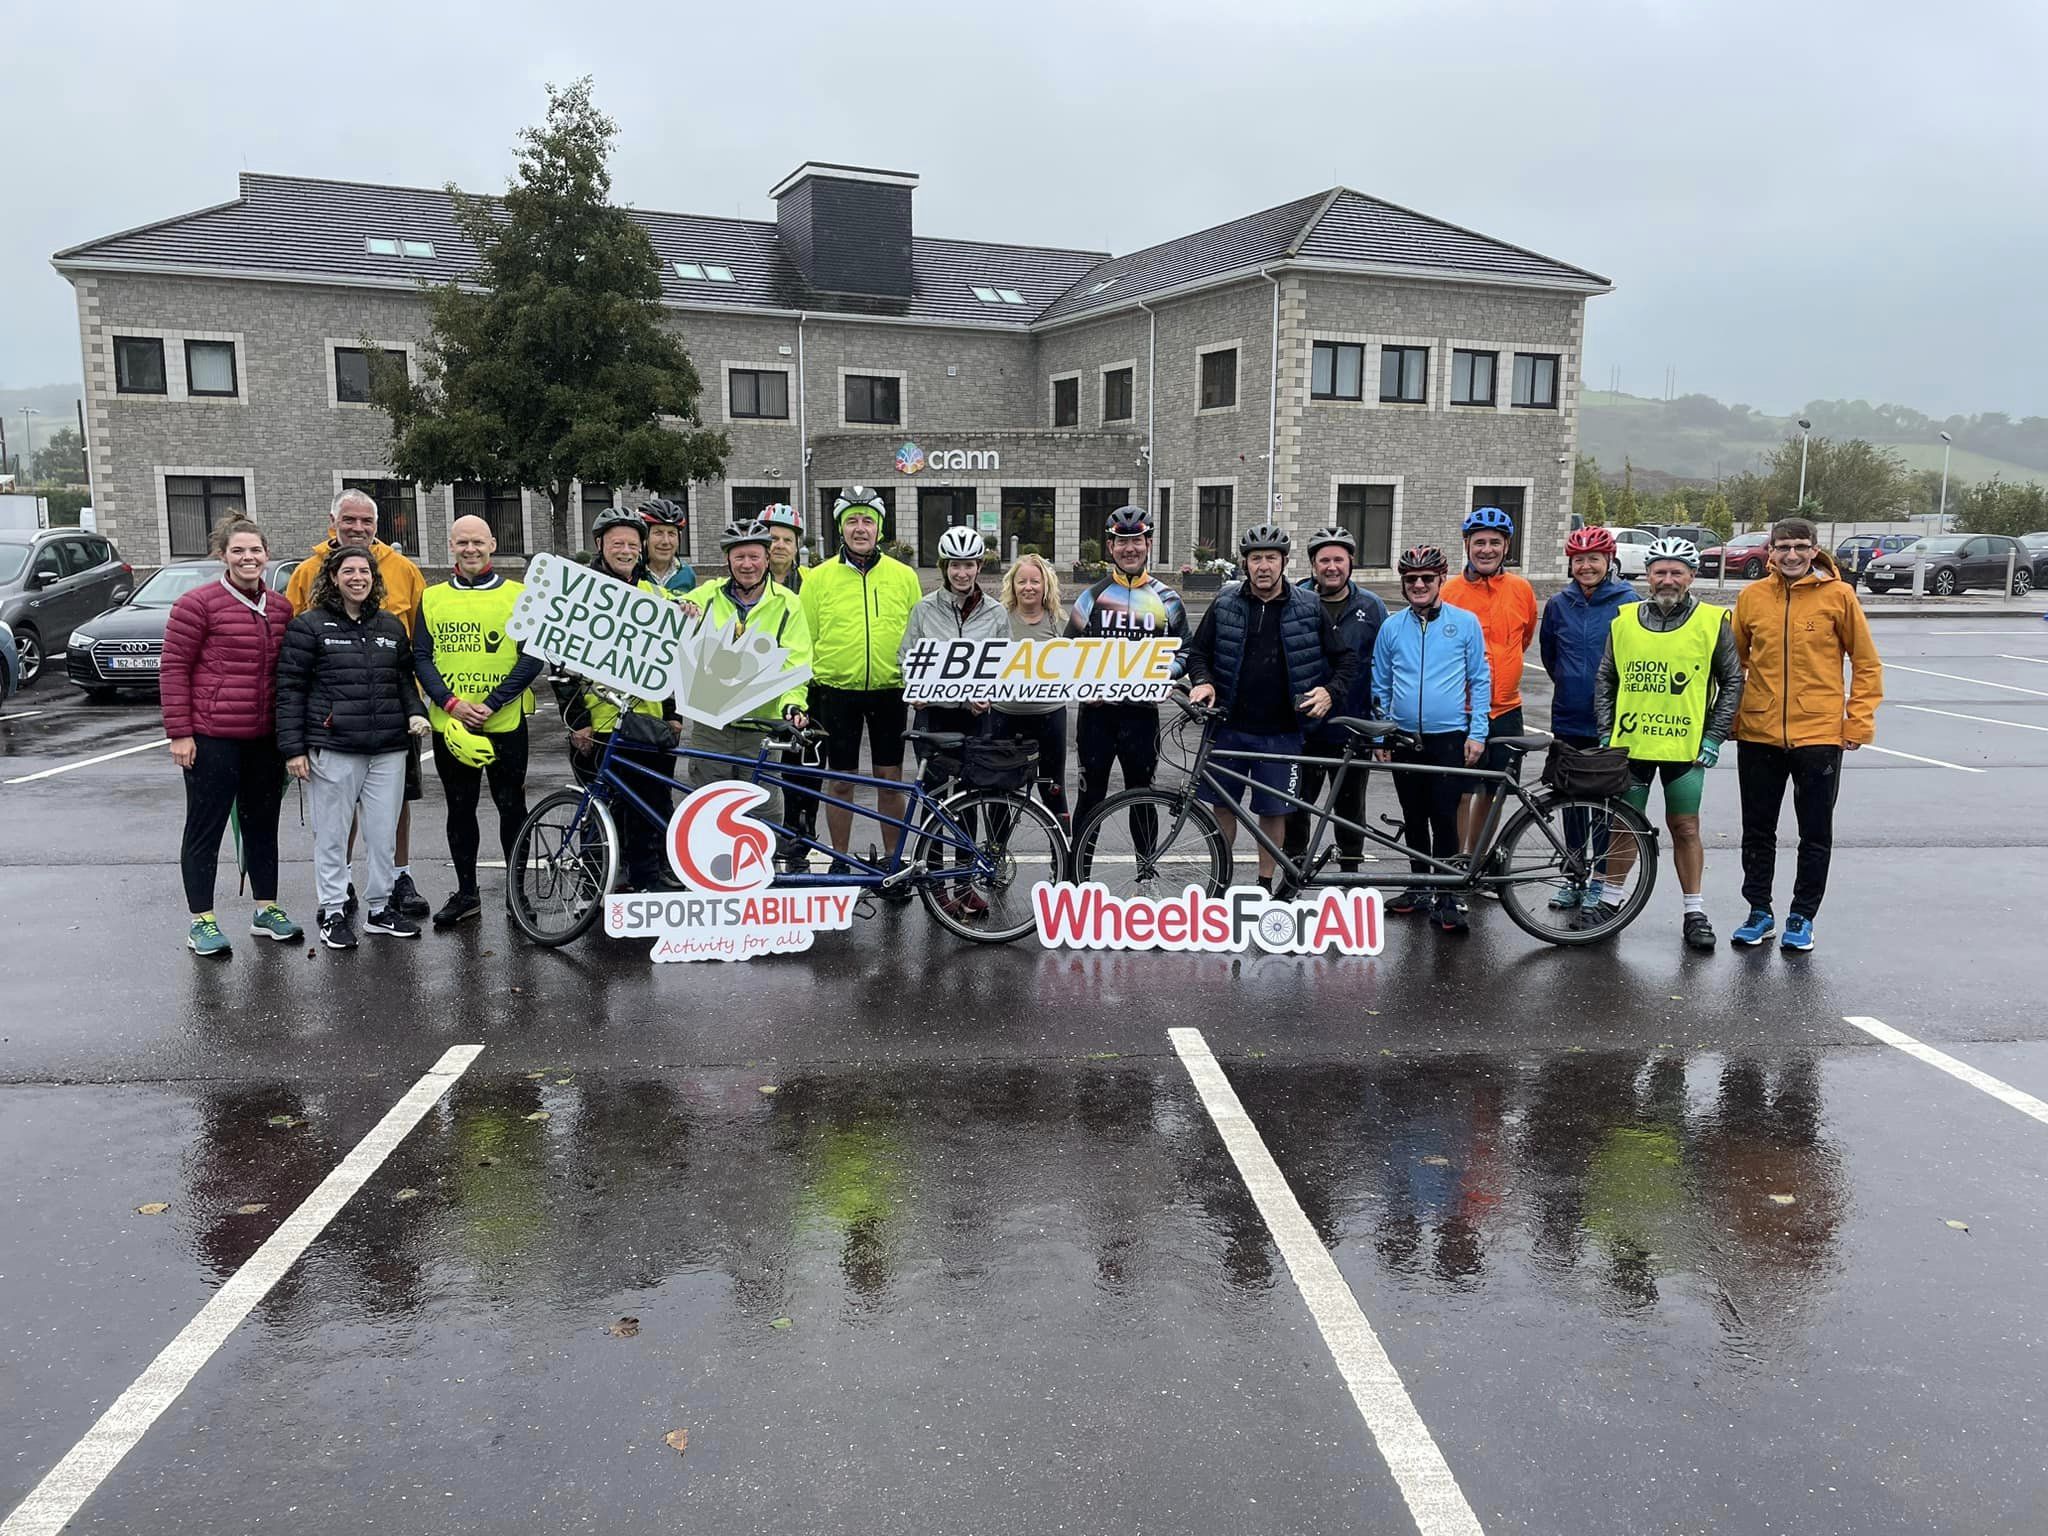 A group of participants and guides at a tandem pilot course. The group are looking at the camera and holding signs for Vision Sports Ireland, Cork SportsAbility, Wheels for All and #BeActive European Week of Sport.